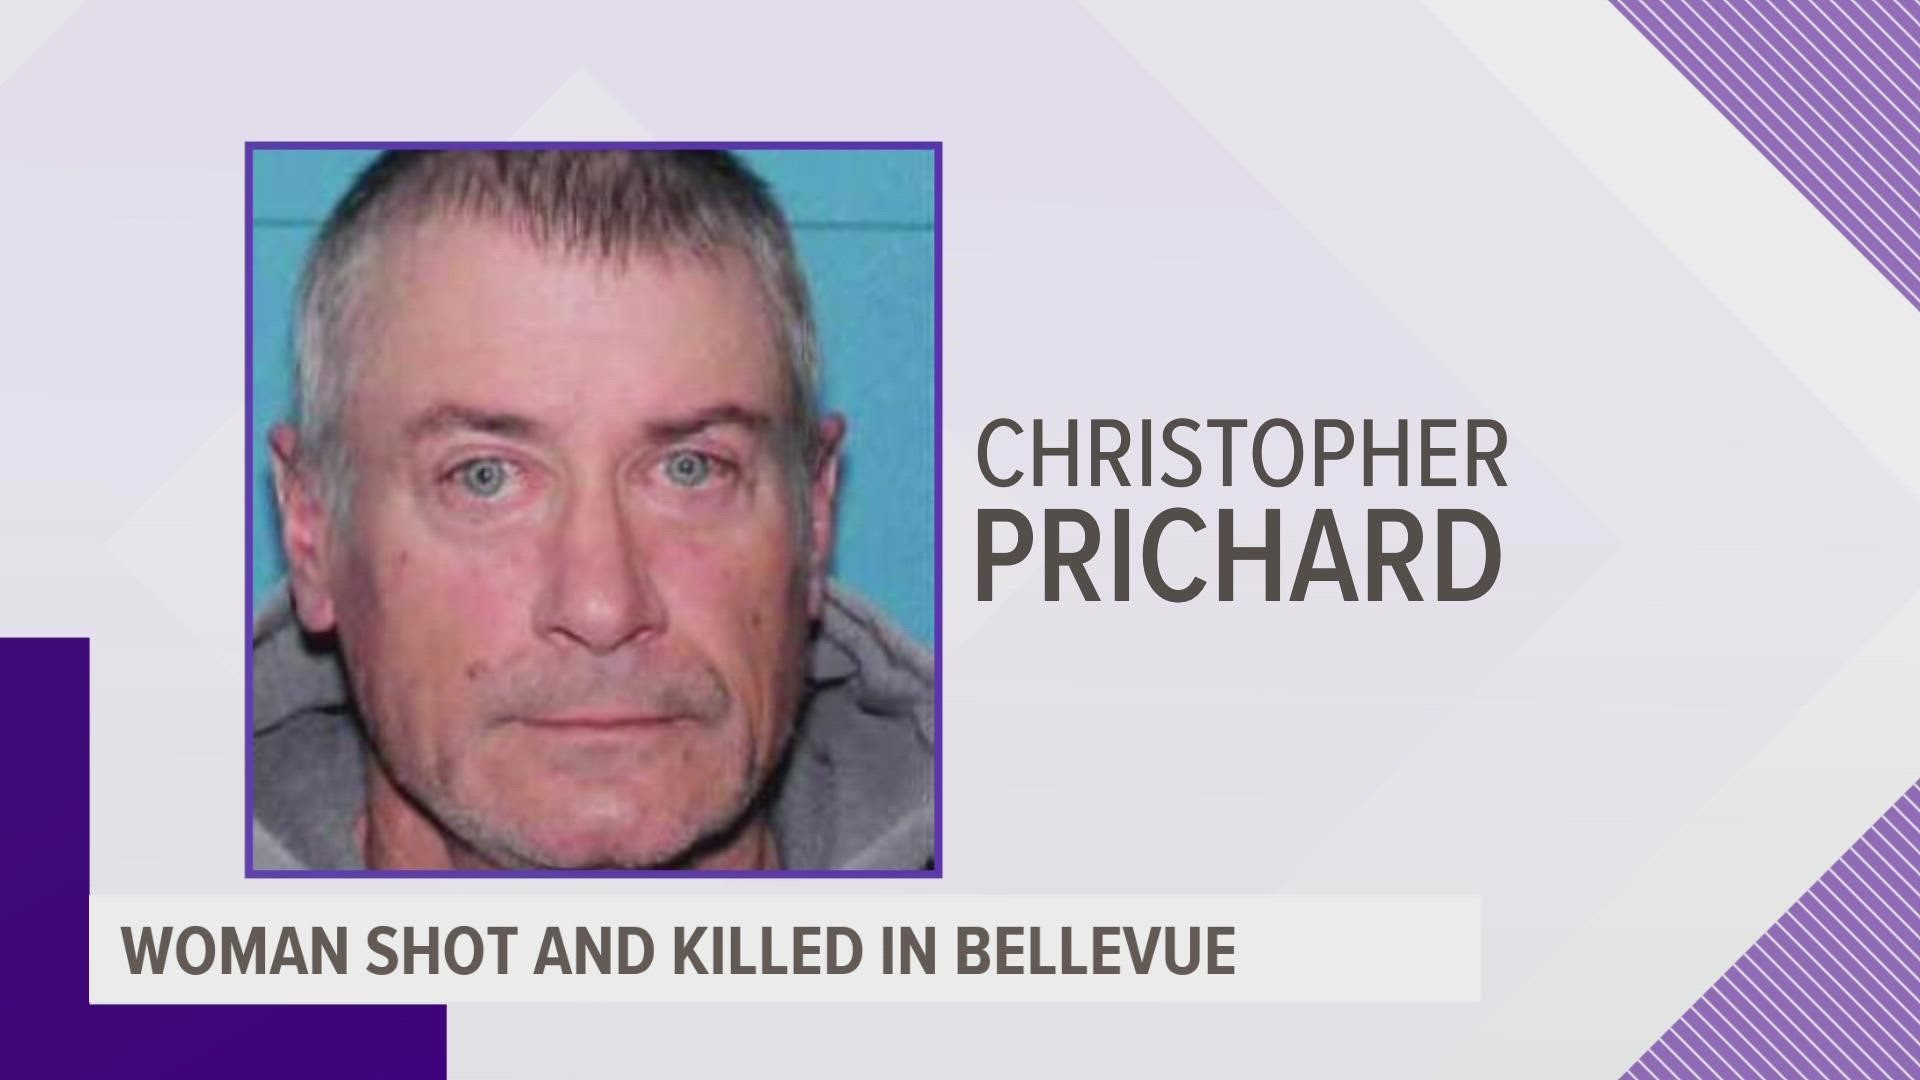 Law enforcement officials have apprehended Christopher Prichard in connection to the murder of 55-year-old Angela Prichard.